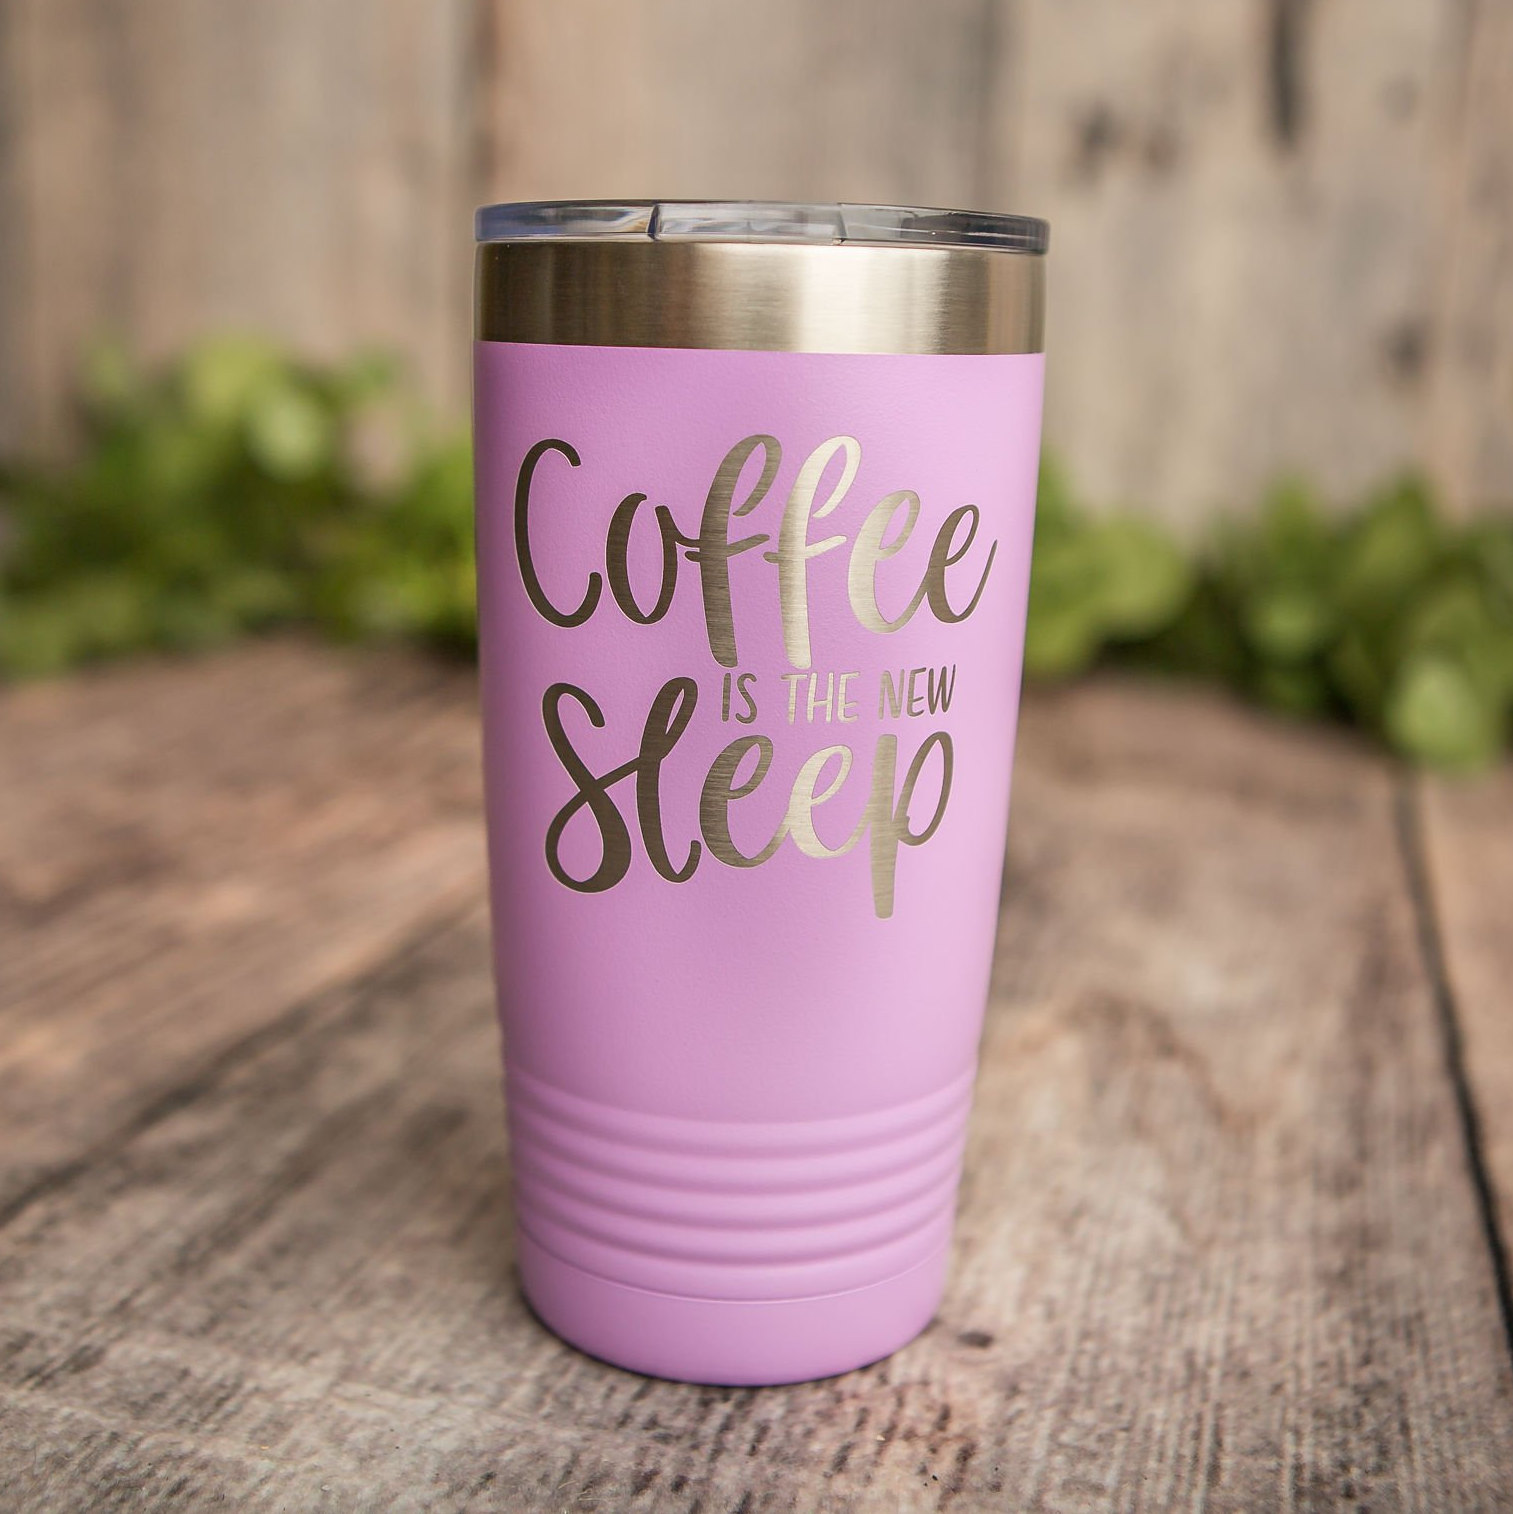 https://3cetching.com/wp-content/uploads/2020/09/coffee-is-the-new-sleep-engraved-stainless-steel-tumbler-insulated-travel-mug-funny-coworker-gift-5f5fc7e0.jpg